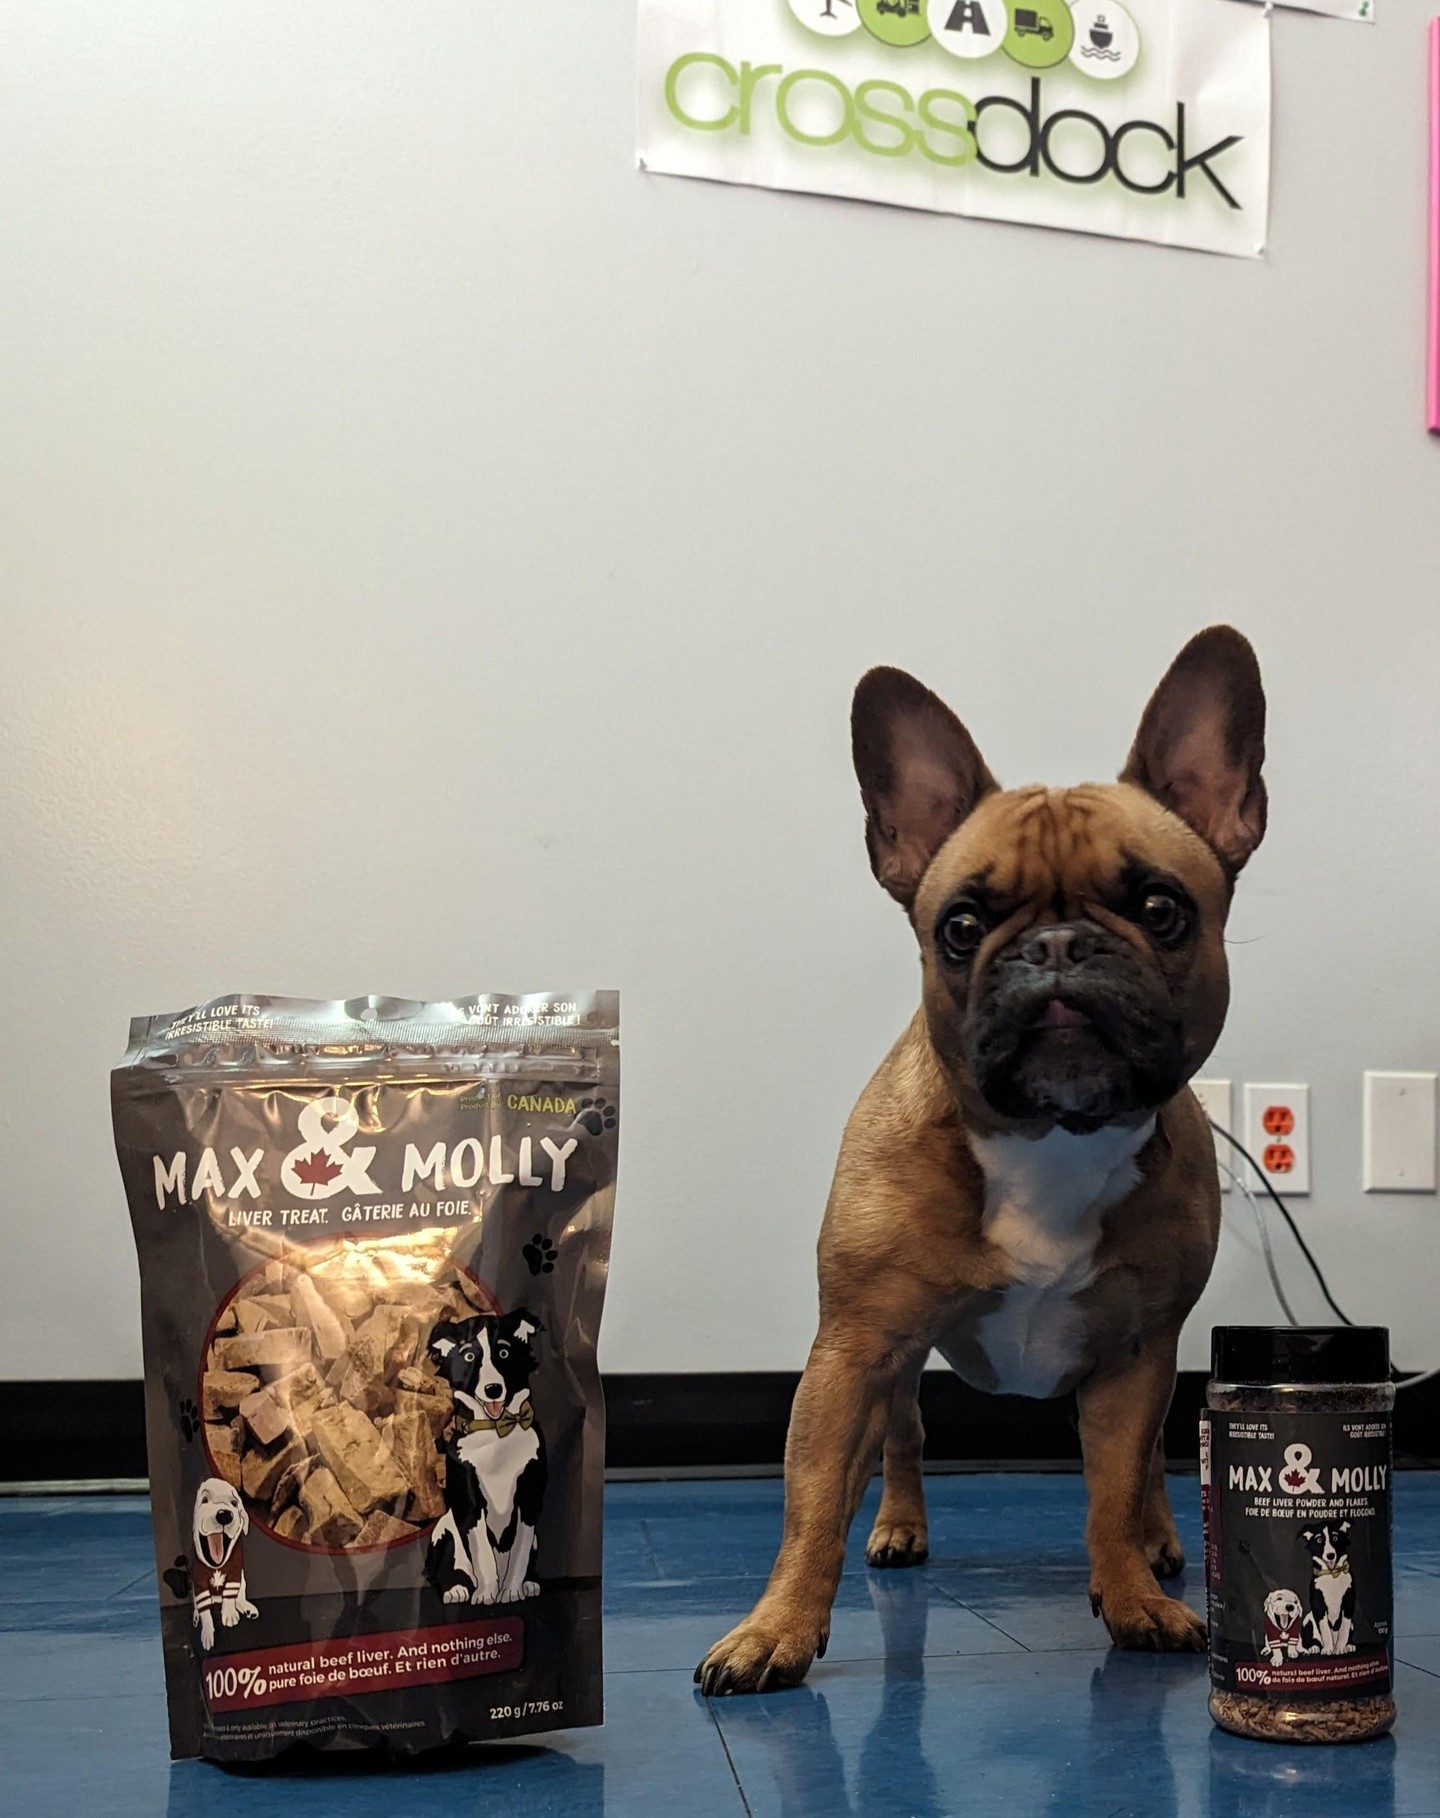 Crossdock's official four-legged greeter Zoe can't wait to dig into these treats from our wonderful clients Sana Petcare.

#Canadian3PL
#3PLCanada
#LogisticsCanada
#SupplyChainCanada
#CanadianLogistics
#3rdPartyLogistics
#LogisticsSolutionsCanada
#CanadaFreight
#CanadianWarehousing
#TransportationCanada